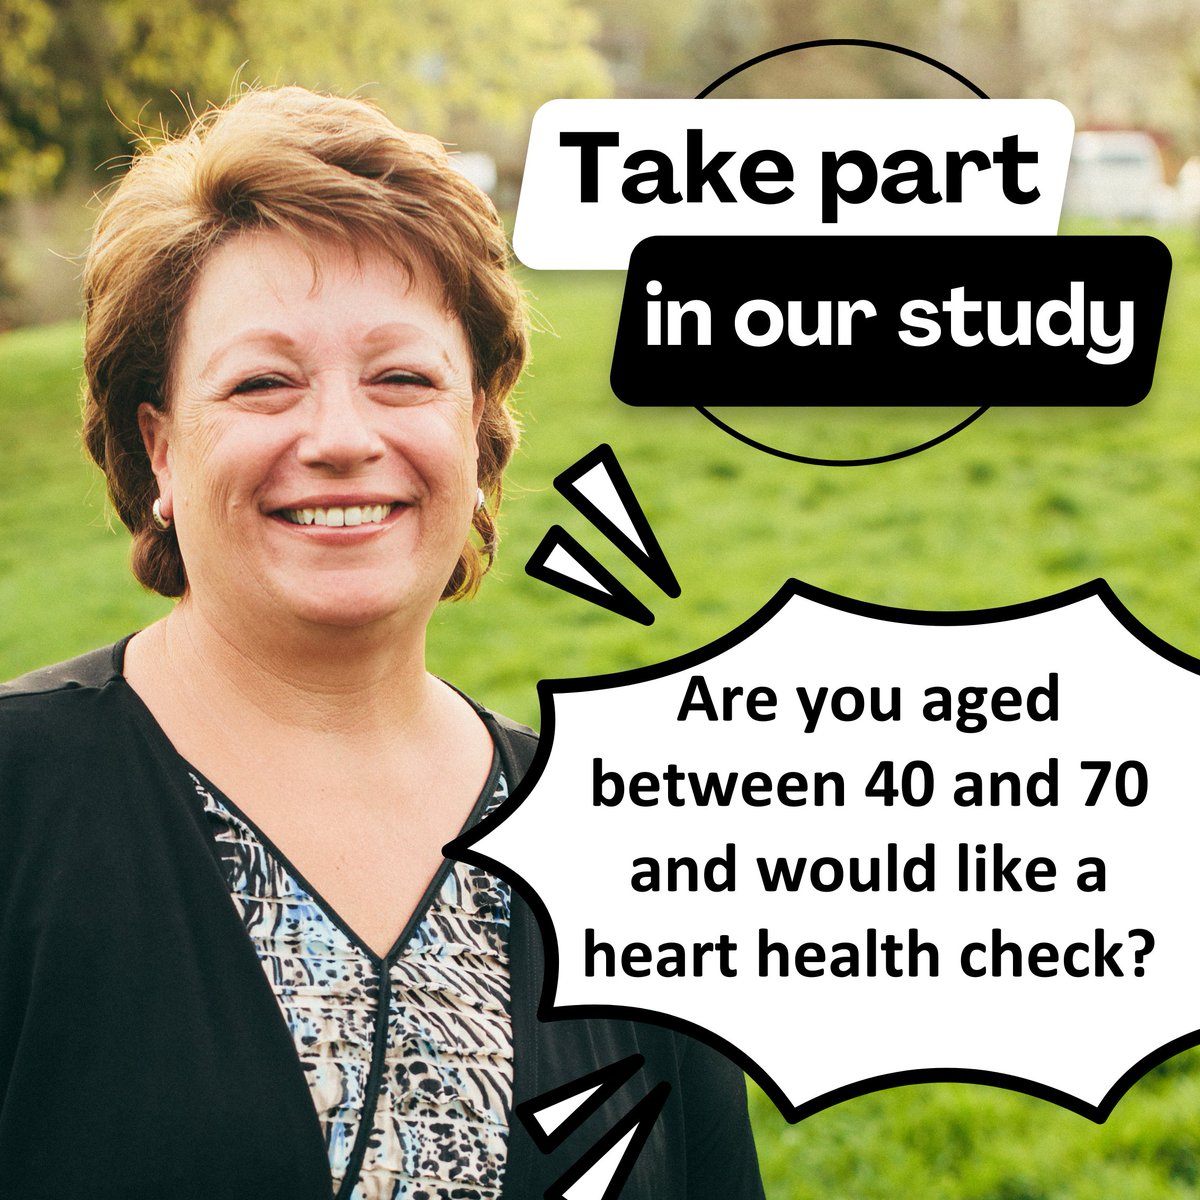 😃 Would you like a #heart health check? 🔬 Researchers from NHS Lothian and #Fife are looking for people to take part in a project which aims to determine the best way of preventing heart attacks. ✅ Call 01382 383235 if interested. Study visit takes place in Edinburgh.